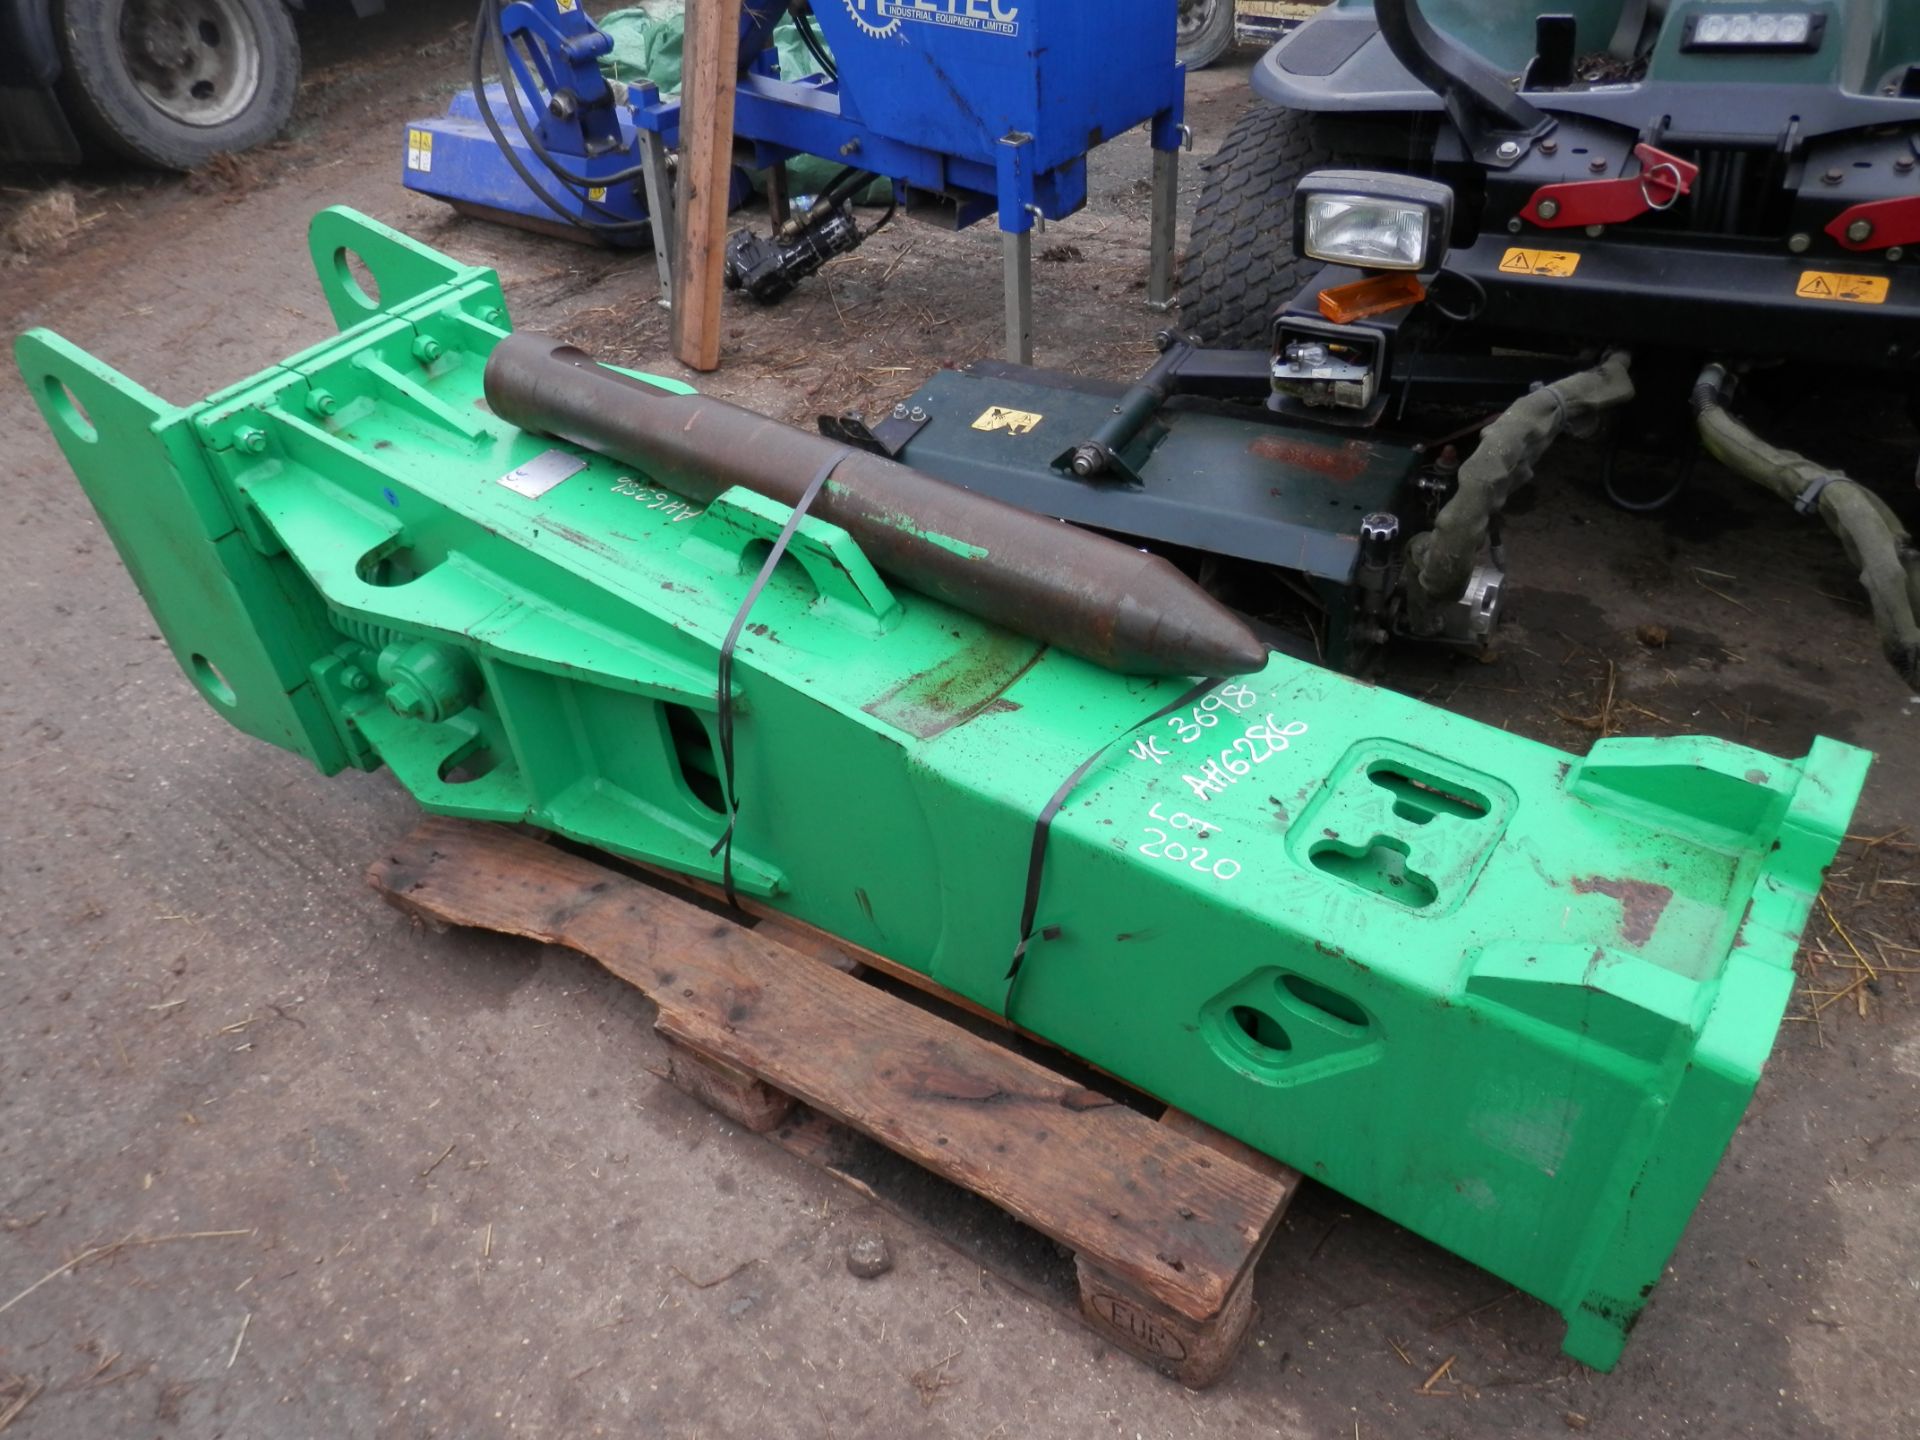 NEW 2016 BREAKER ATTACHMENT FOR DIGGER, MODEL BRH501SIL, COST £15000 NEW